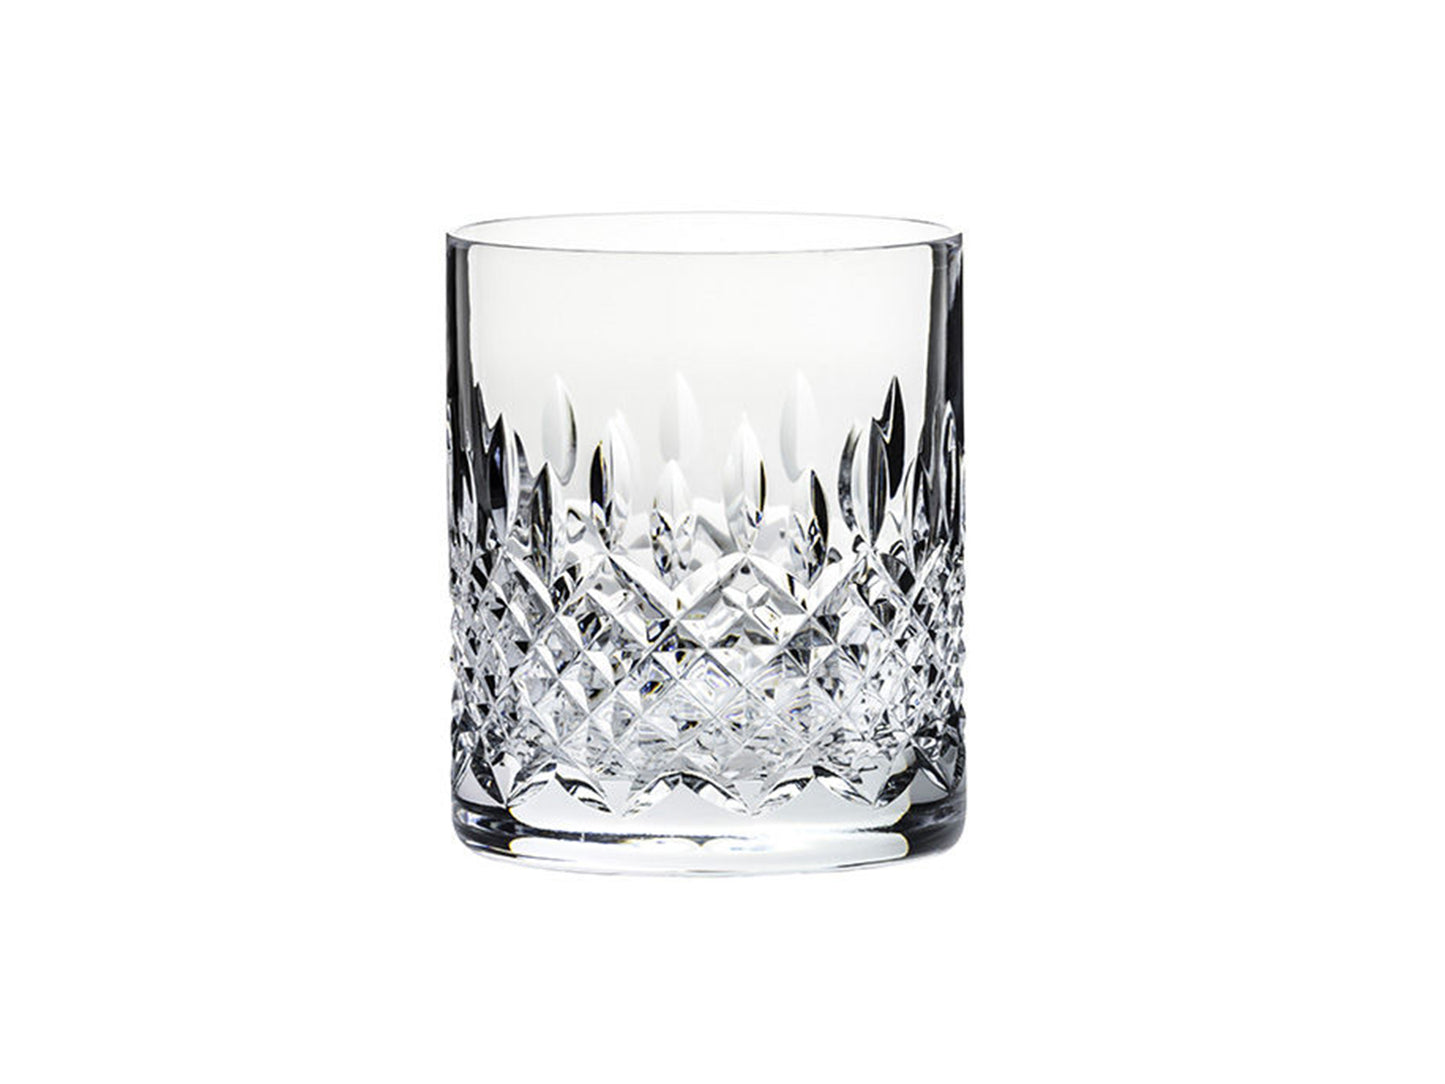 A crystal whisky glass with an intricate bed of diamonds cut around the base with dashes going up towards the smooth rim